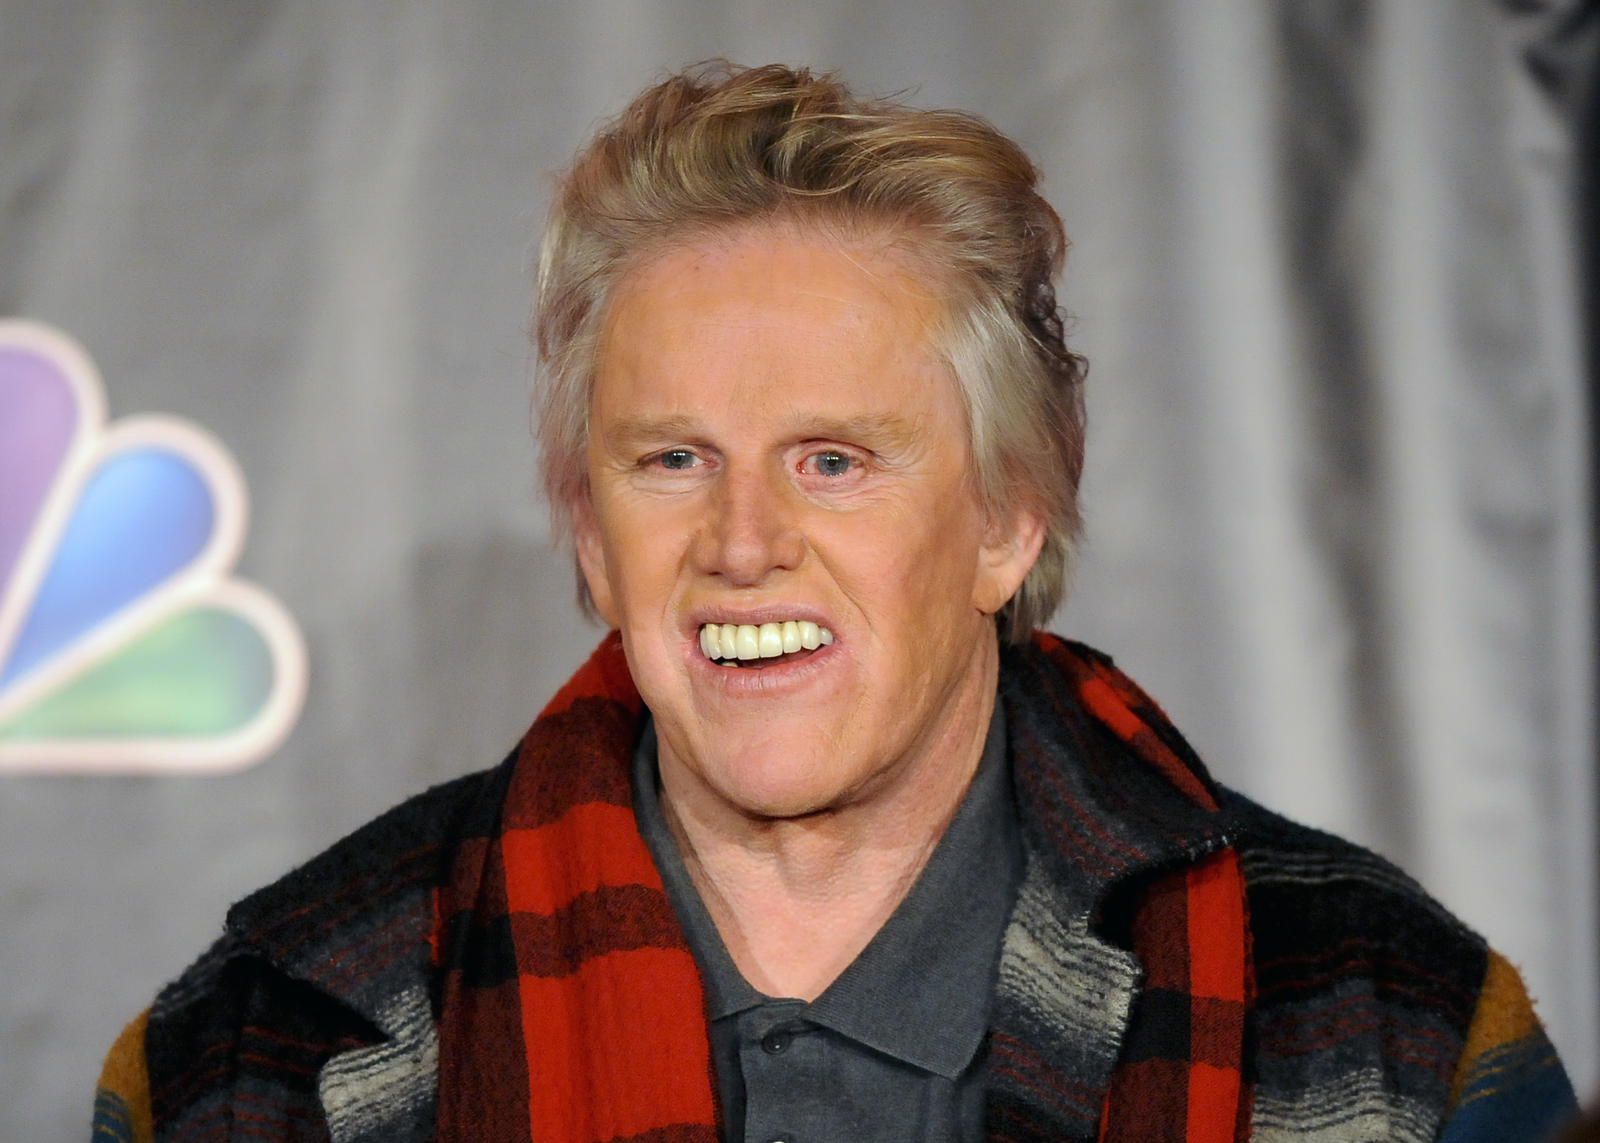 Actor Gary Busey takes part in a panel discussion of “All-Star Celebrity Apprentice” during the 2013 Winter Press Tour for the Television Critics Association in Pasadena